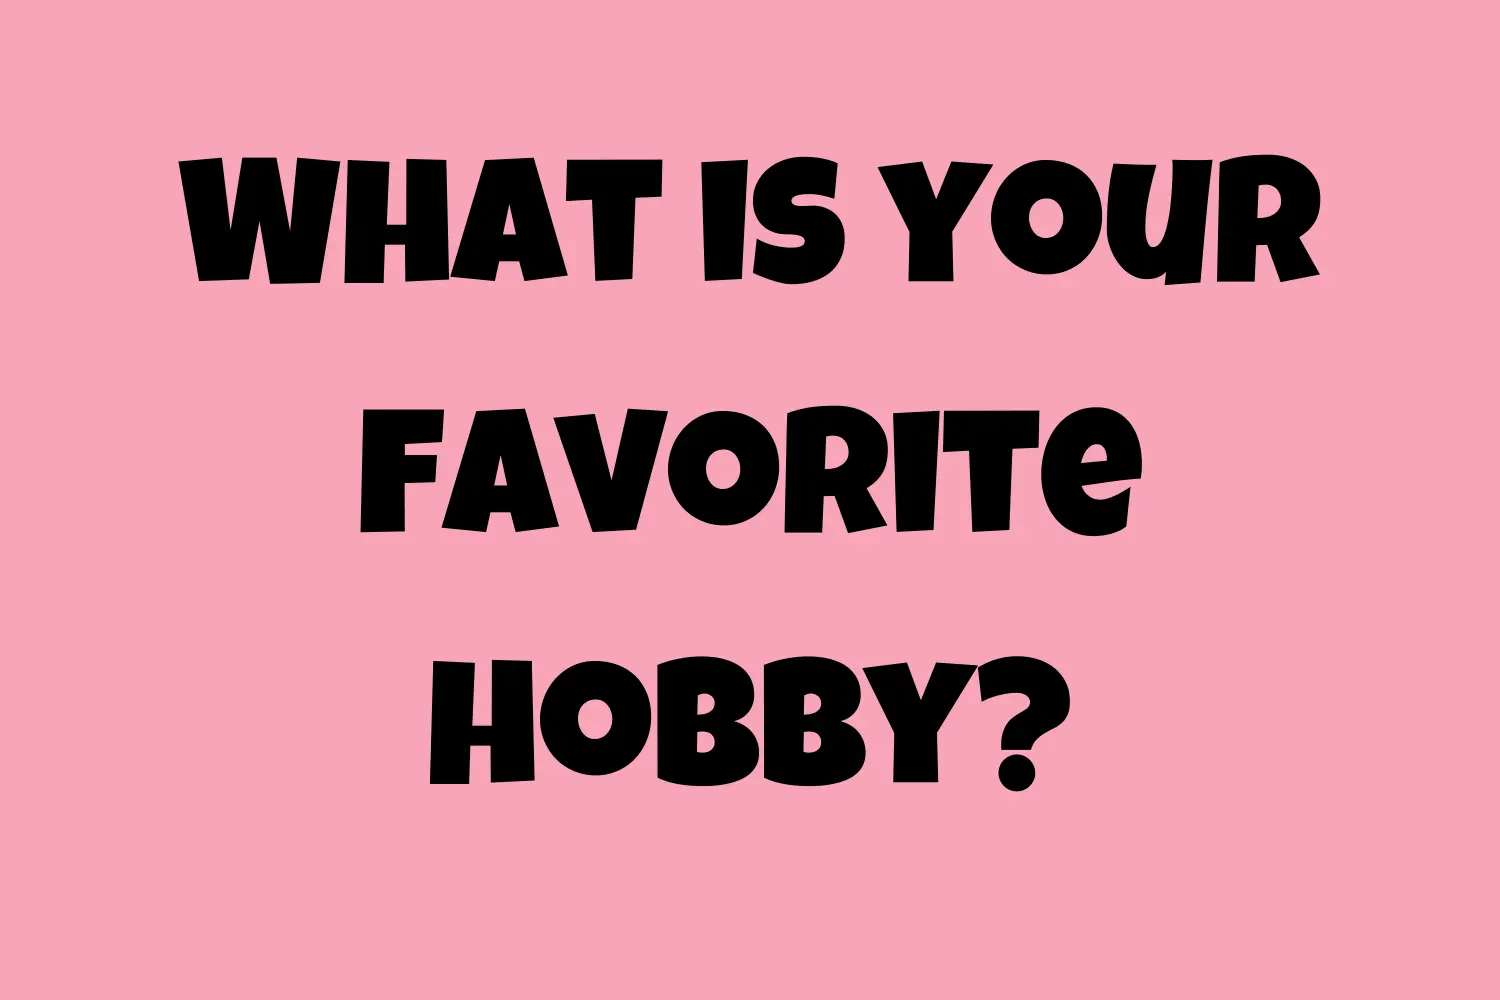 What is your favorite hobby